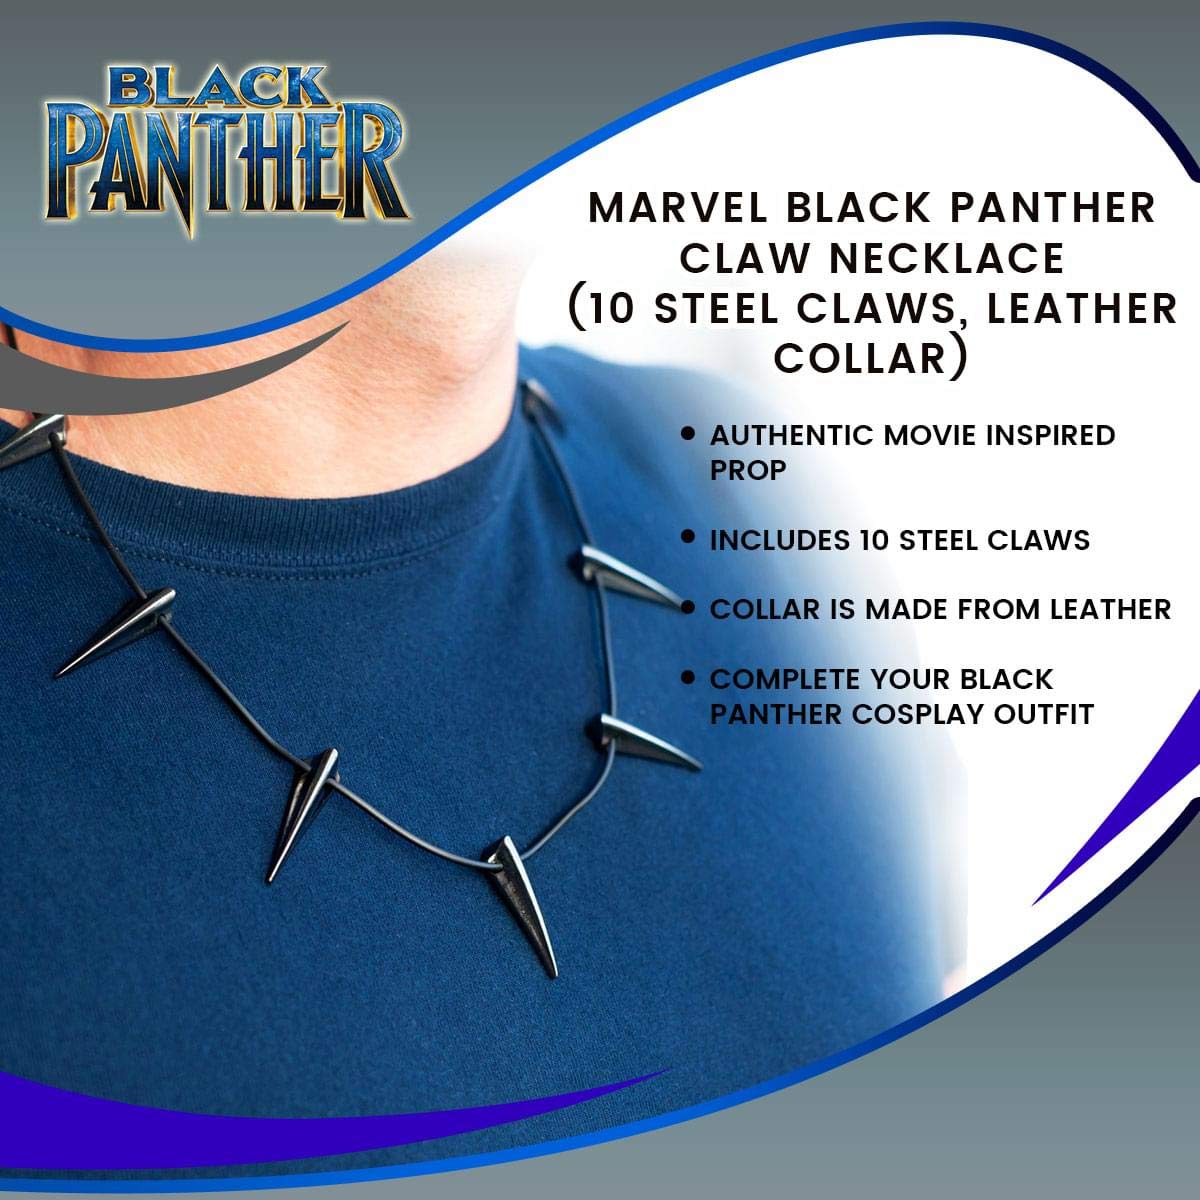 Black Panther Claw Necklace – Authentic Marvel comics Cosplay Pendant Wakanda King T’Challa [10 steel claws, leather collar] Cool superhero jewelry/accessory for Halloween Costume, Action Figure Party